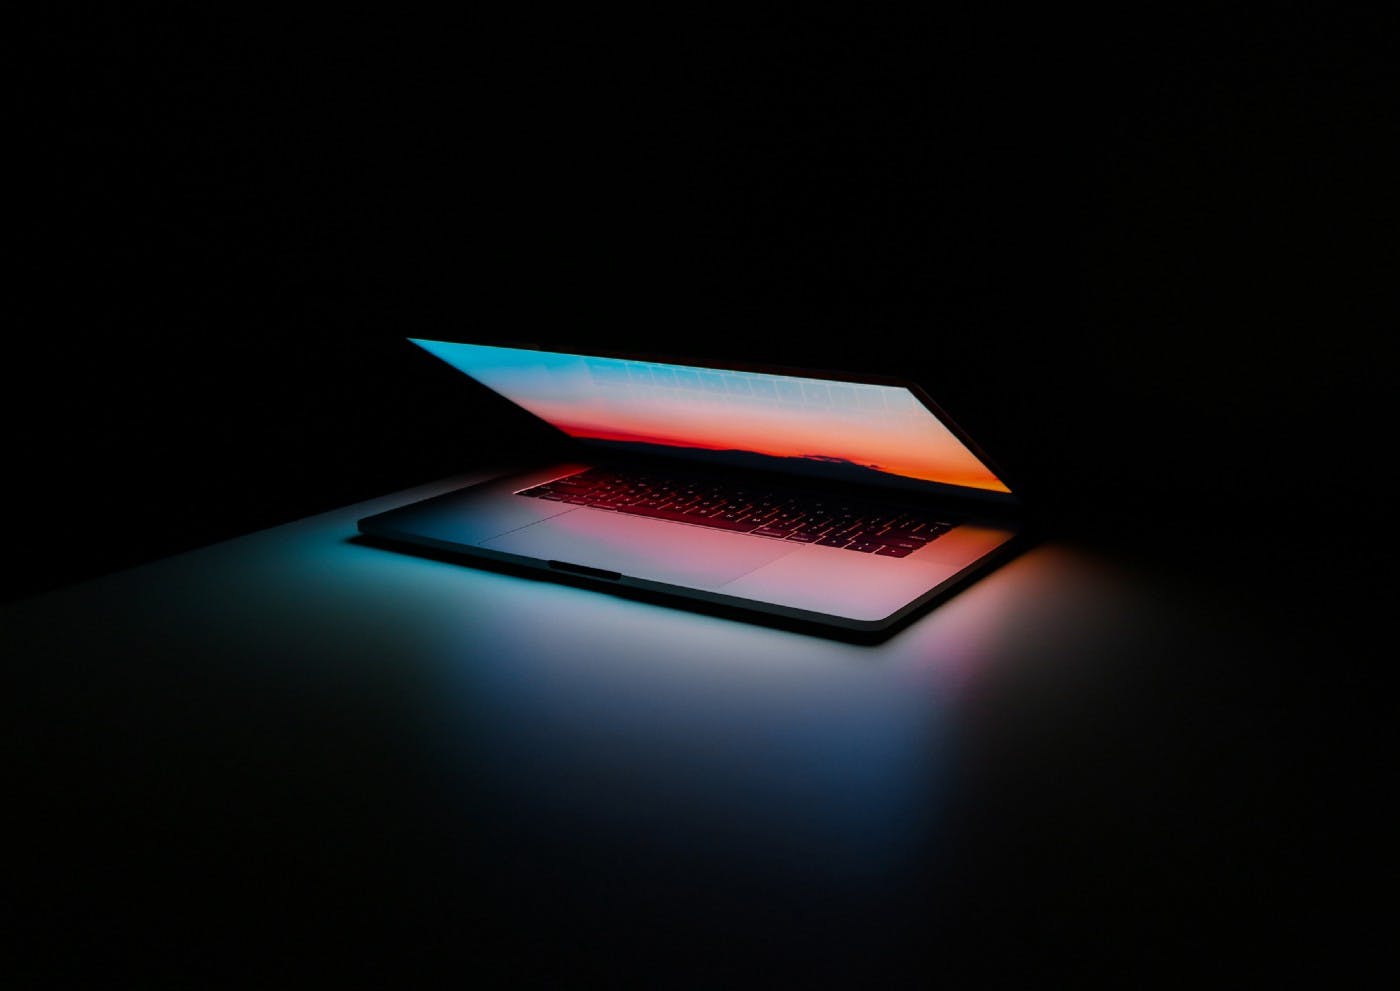 Photo of Mac laptop, partially closed, with screen aglow in a dark room.